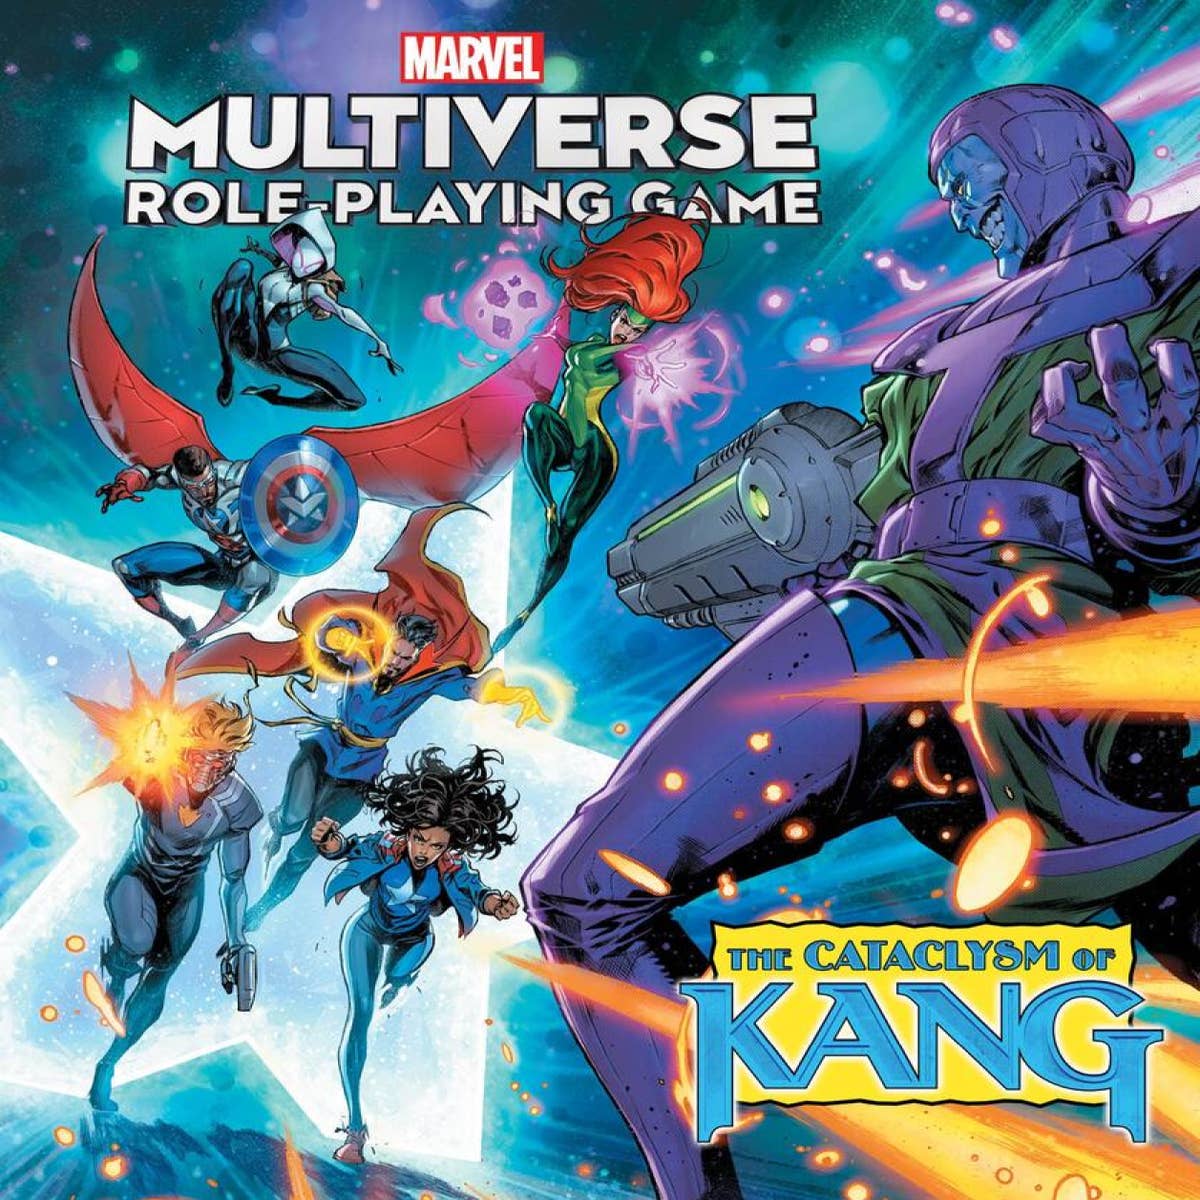 Learn More About the Playable Heroes from the Marvel Multiverse